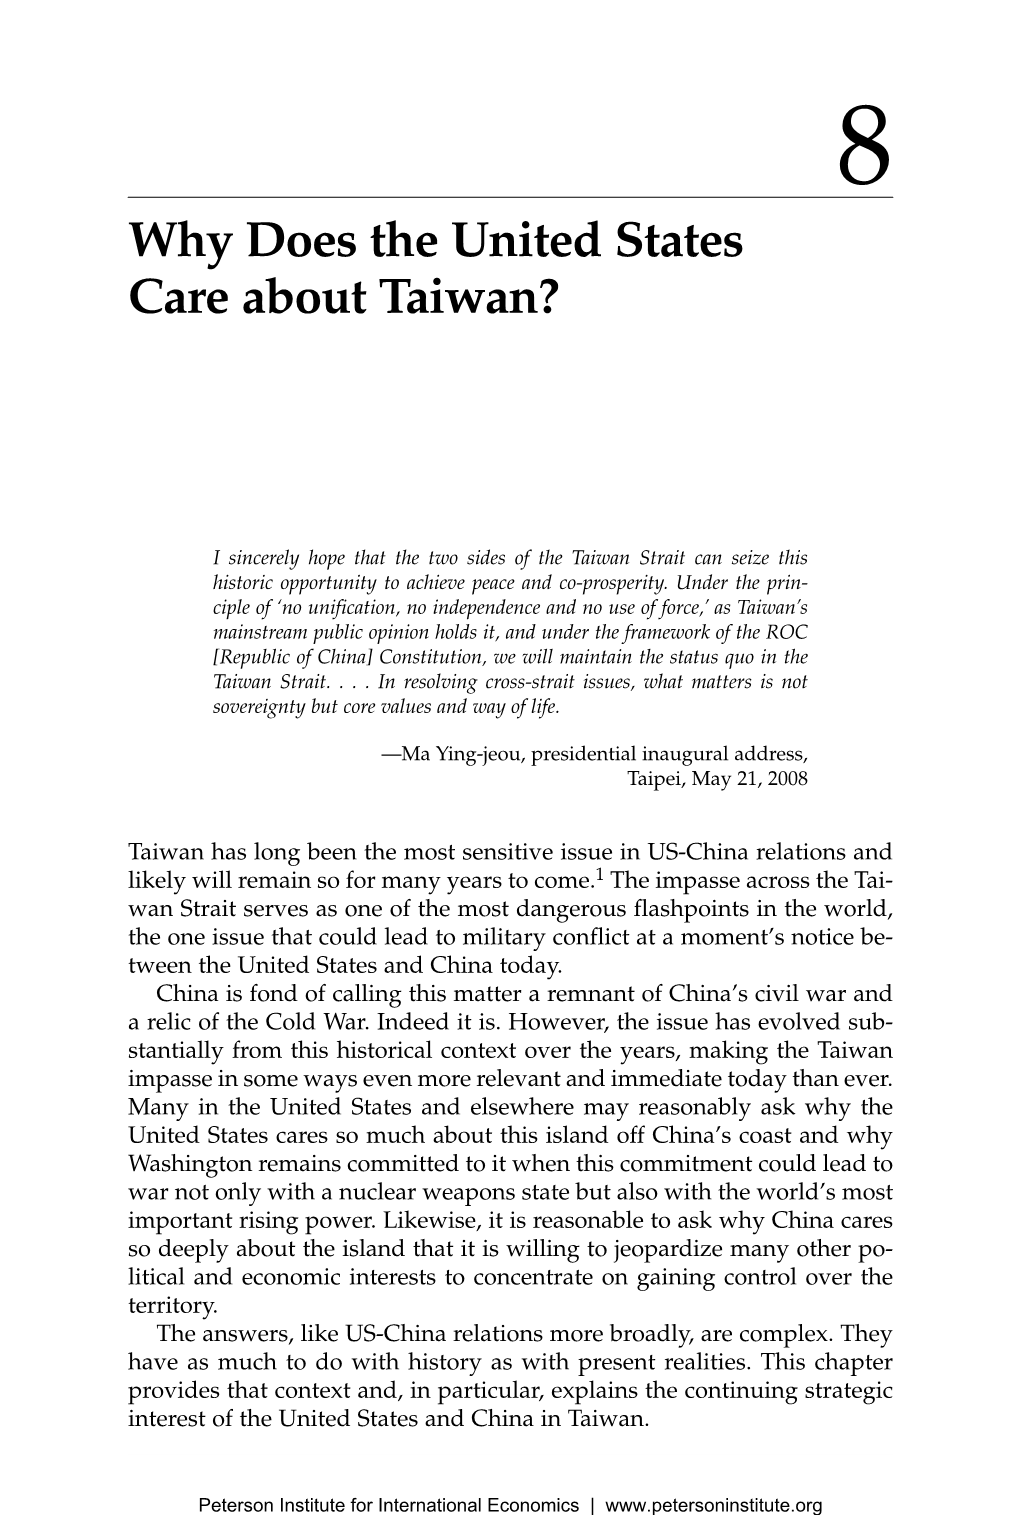 Ch 8 Why Does the United Statescare About Taiwan?